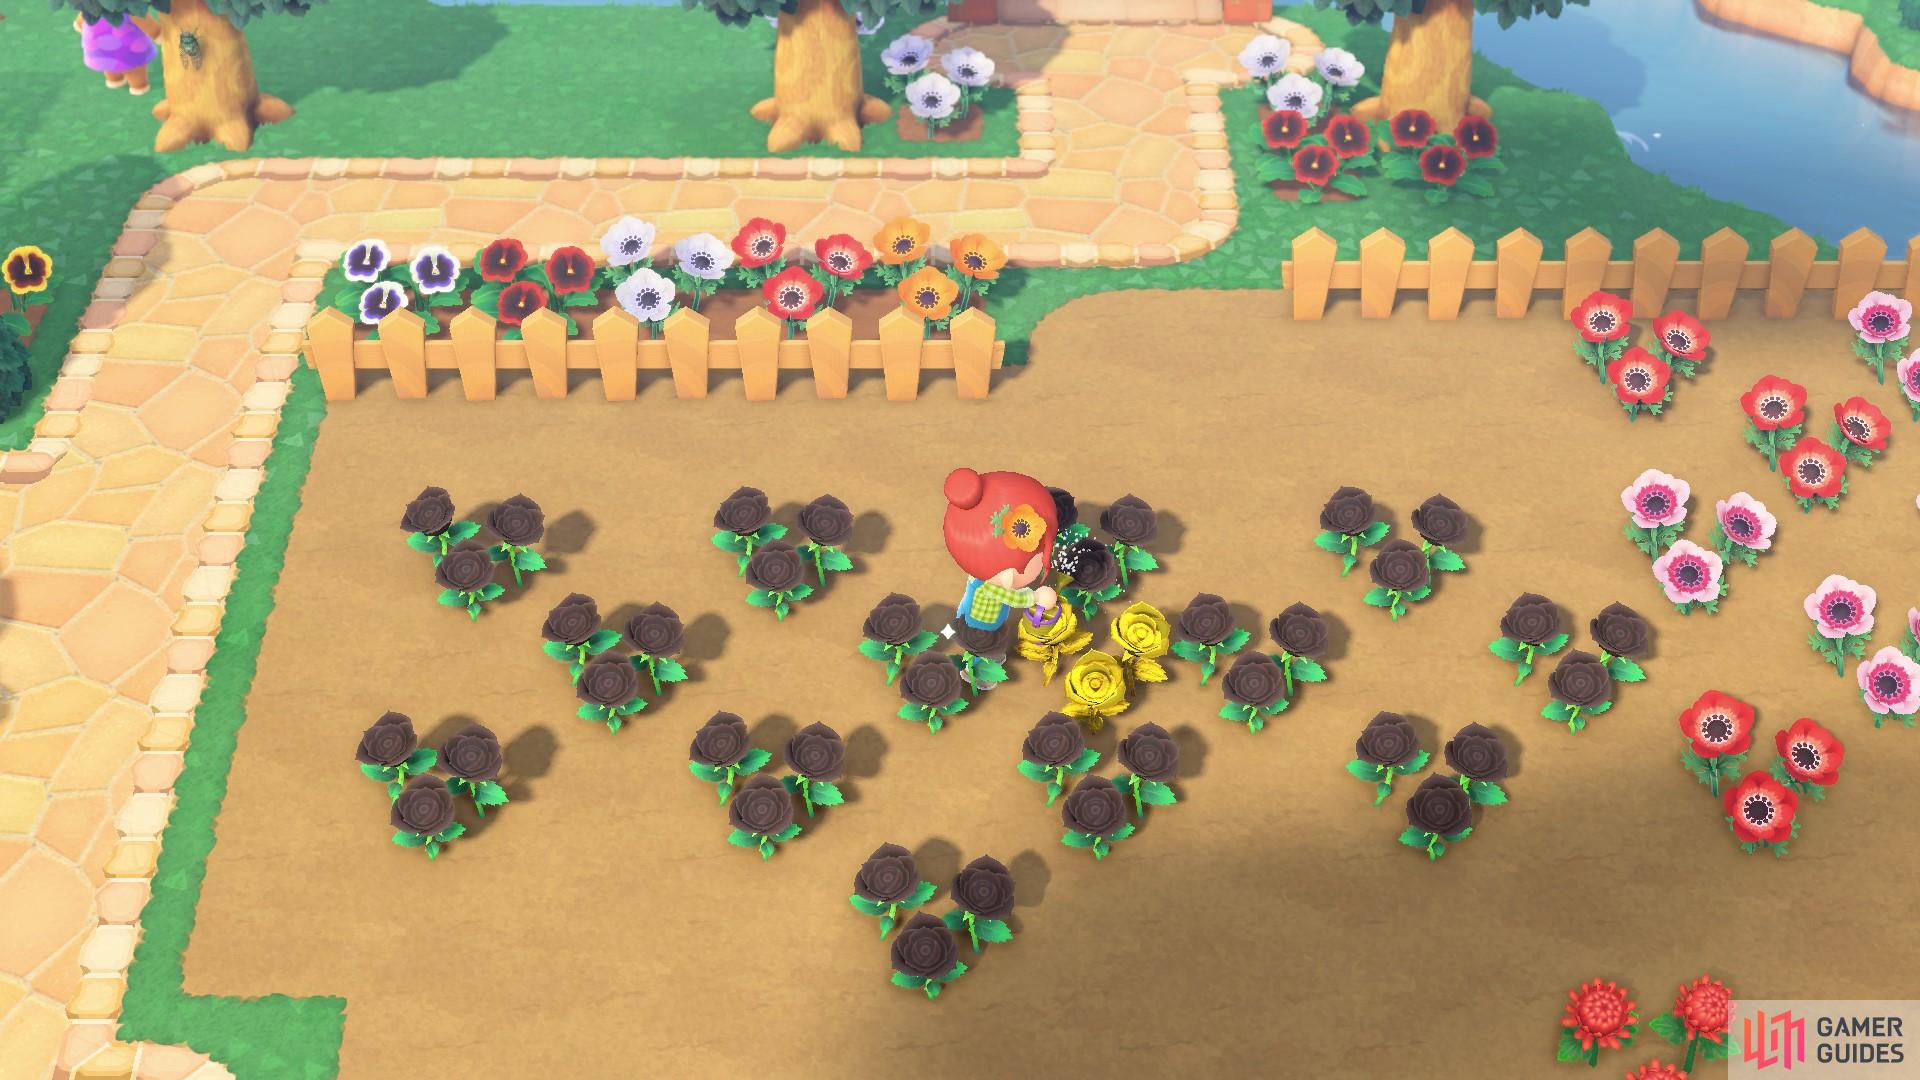 You will get all sorts of fun new flower variations if you water them!